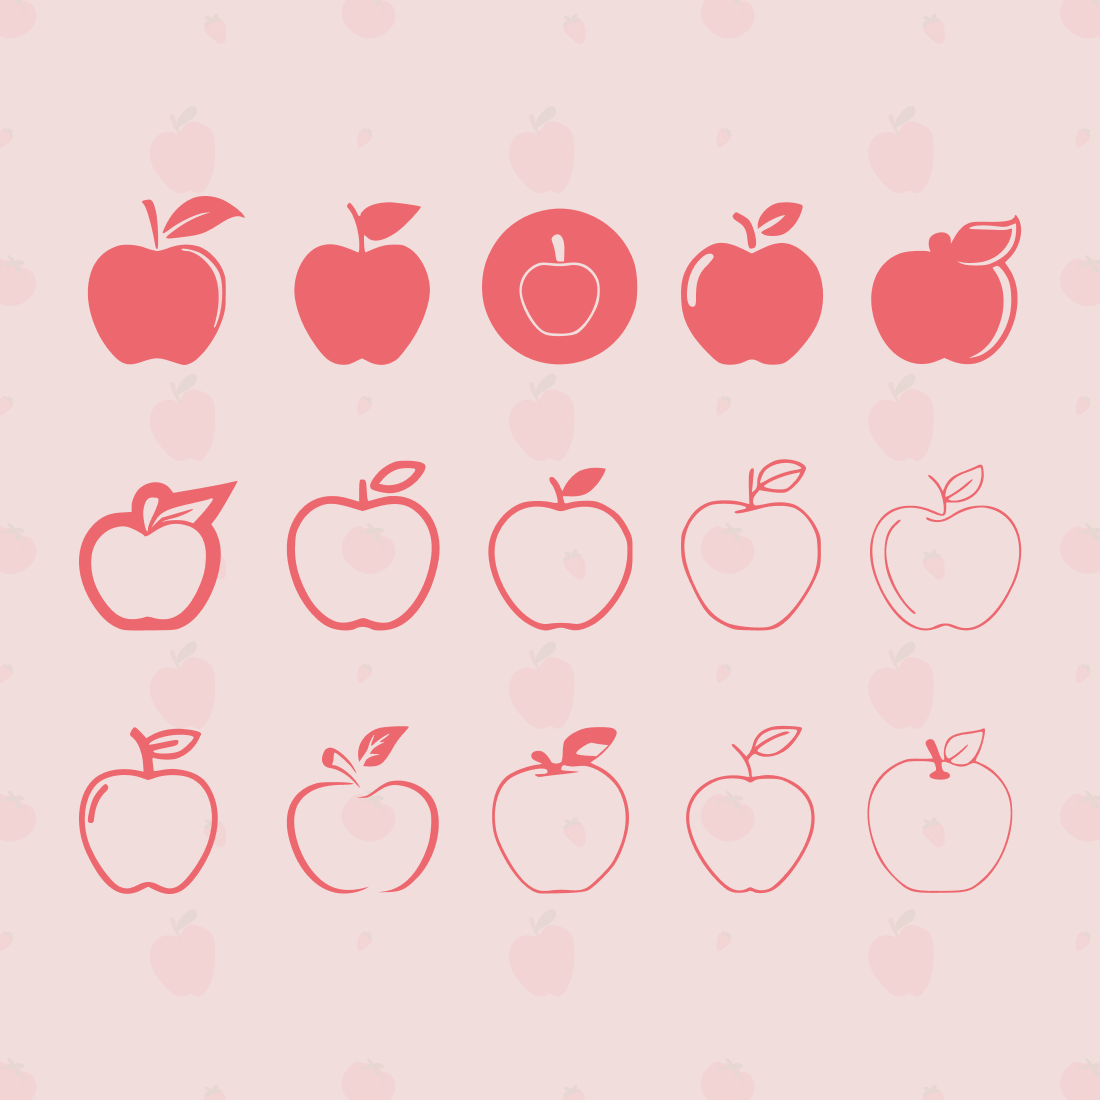 First Square Picture Apple SVG Bundle.